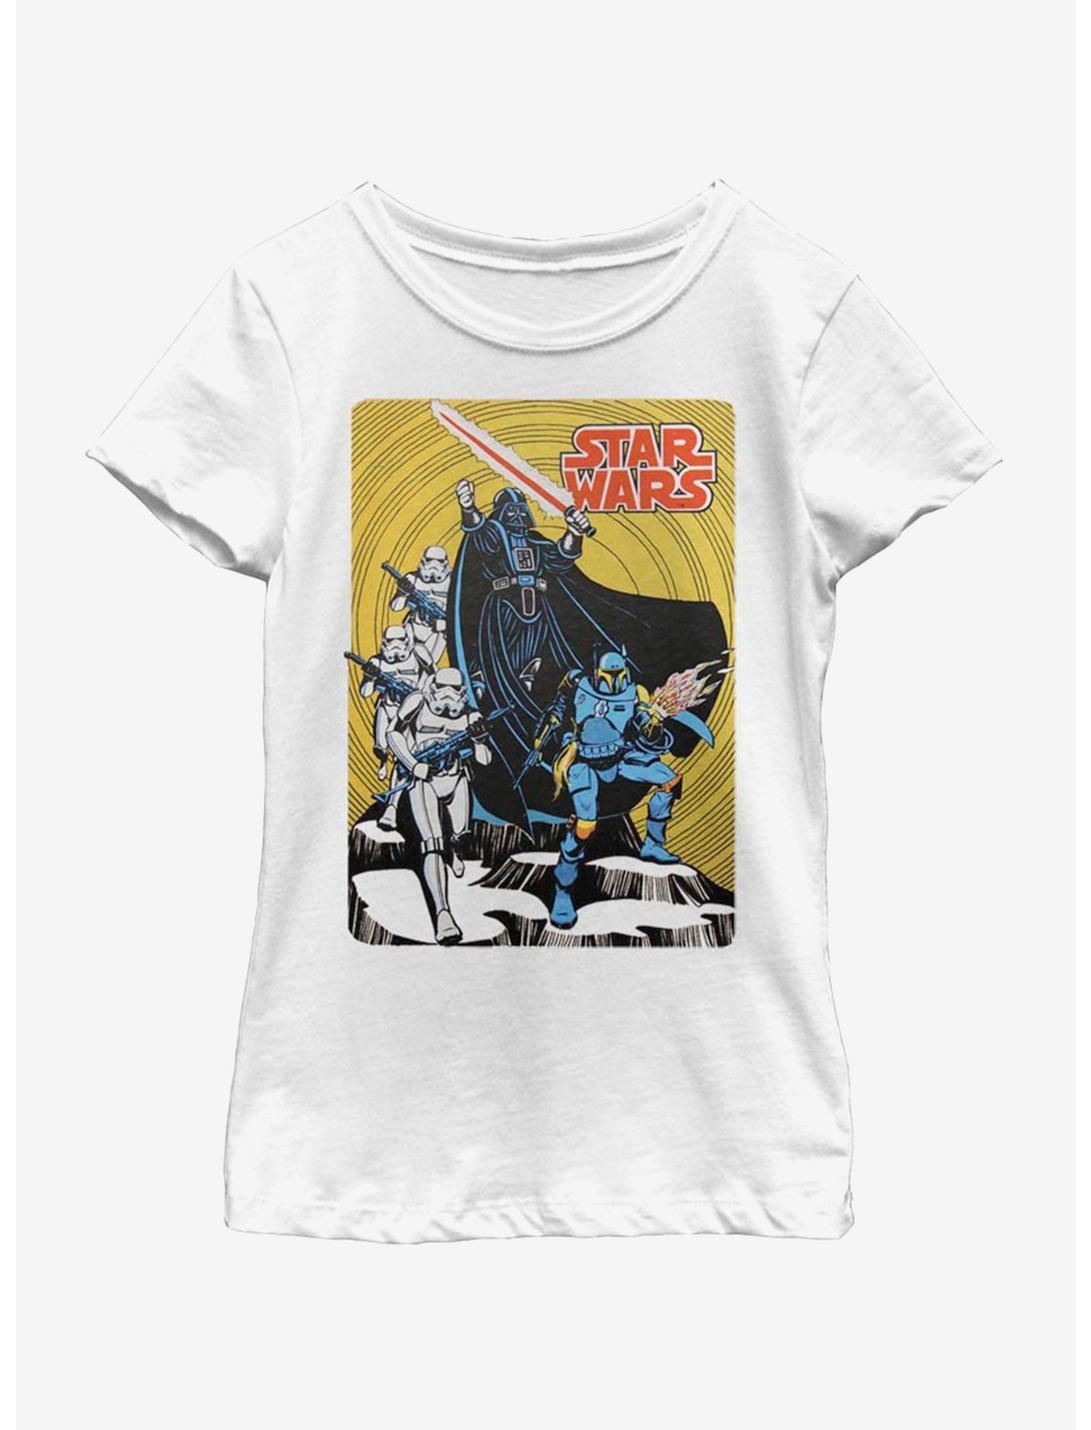 Star Wars Vintage Cover Youth Girls T-Shirt, WHITE, hi-res